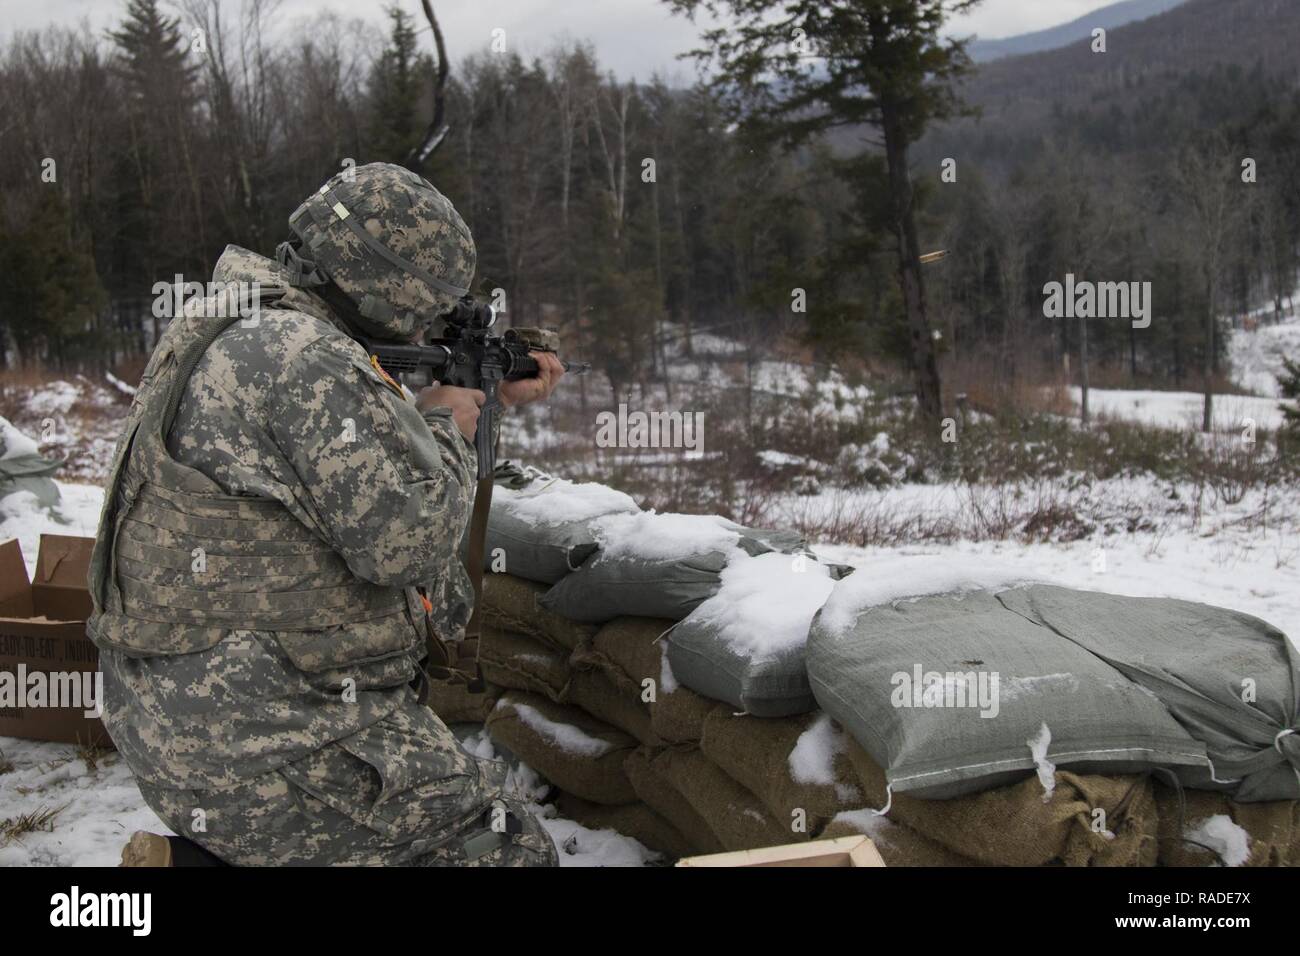 U.S. Army Spc. Emelio Madera-Valerio, assigned to Charlie Company, 3rd Battalion, 172nd Infantry Regiment, 86th Infantry Brigade Combat Team (Mountain), New Hampshire National Guard, provides cover fire for mortar crews at Camp Ethan Allen Training Site, Jericho, Vt., Jan. 26, 2017. The Soldiers repelled a simulate enemy attack in one of the different scenarios for mortar teams during their winter annual training. Stock Photo